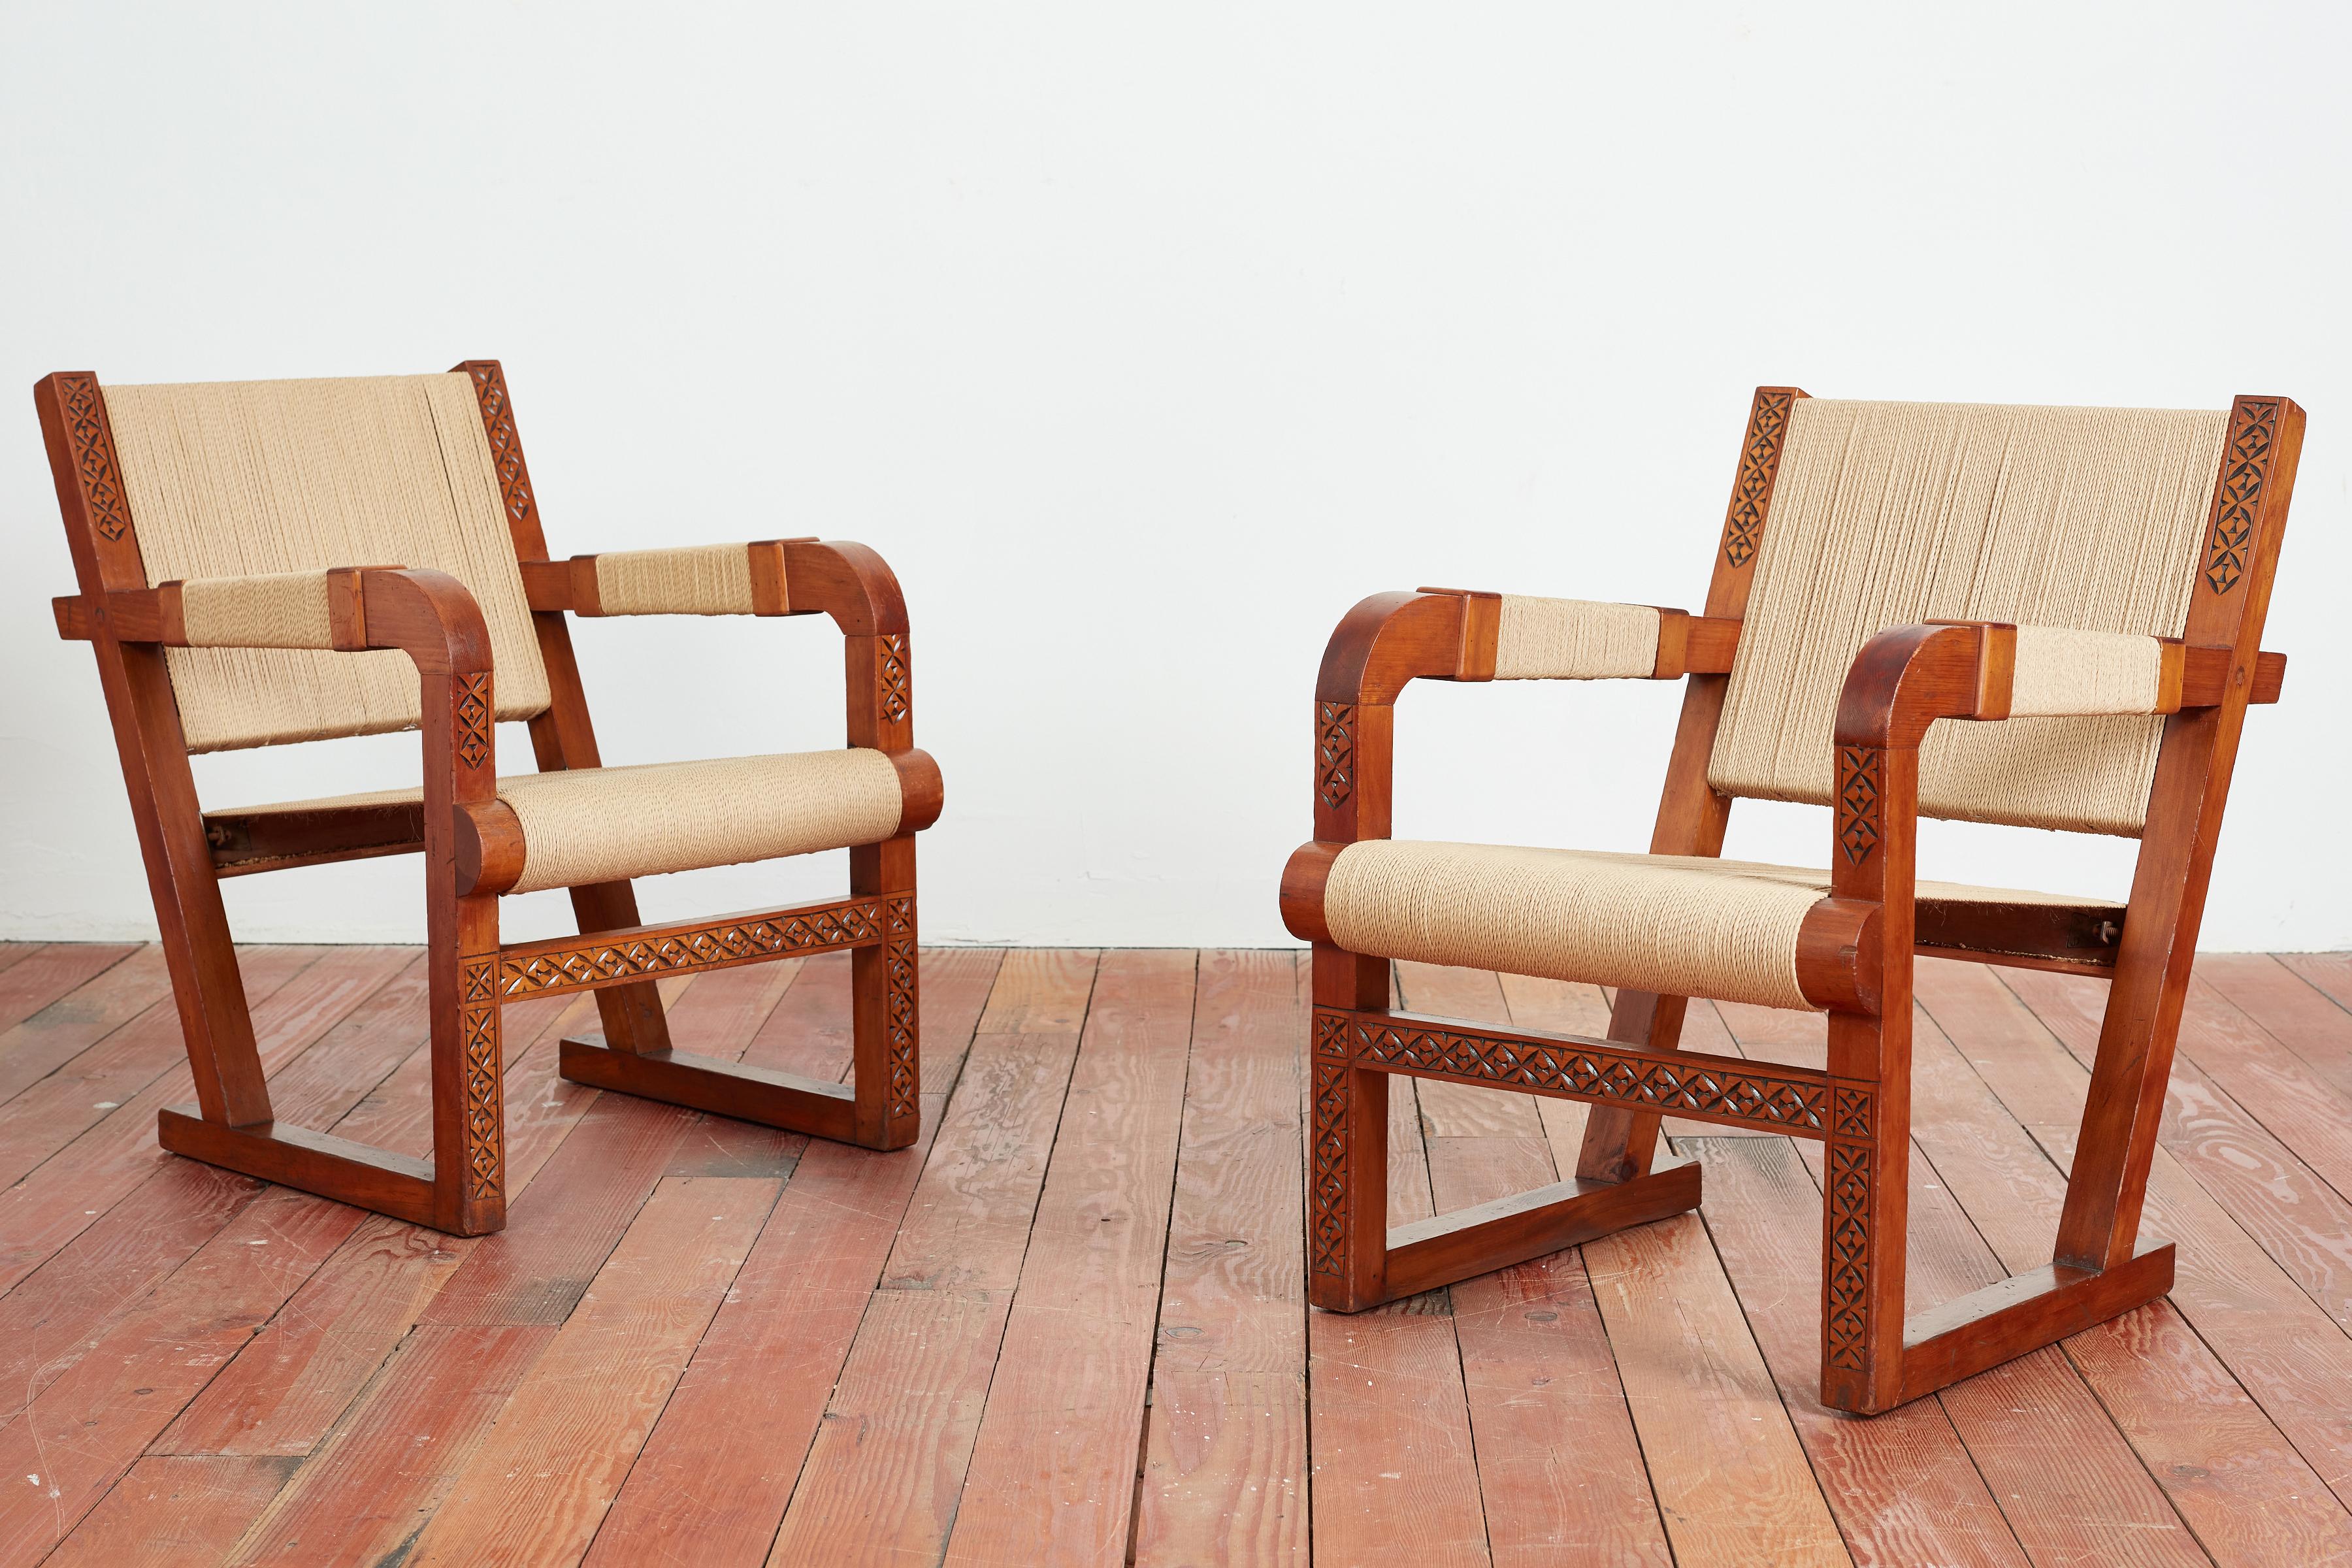 Pair of Francis Jourdain chairs
France, 1940's
Bentwood oak arms with top seat, back and arms
Oak frame has hand carved detailing throughout a
Great from ever angle with wonderful patina.
Rope is newly re-done in France 